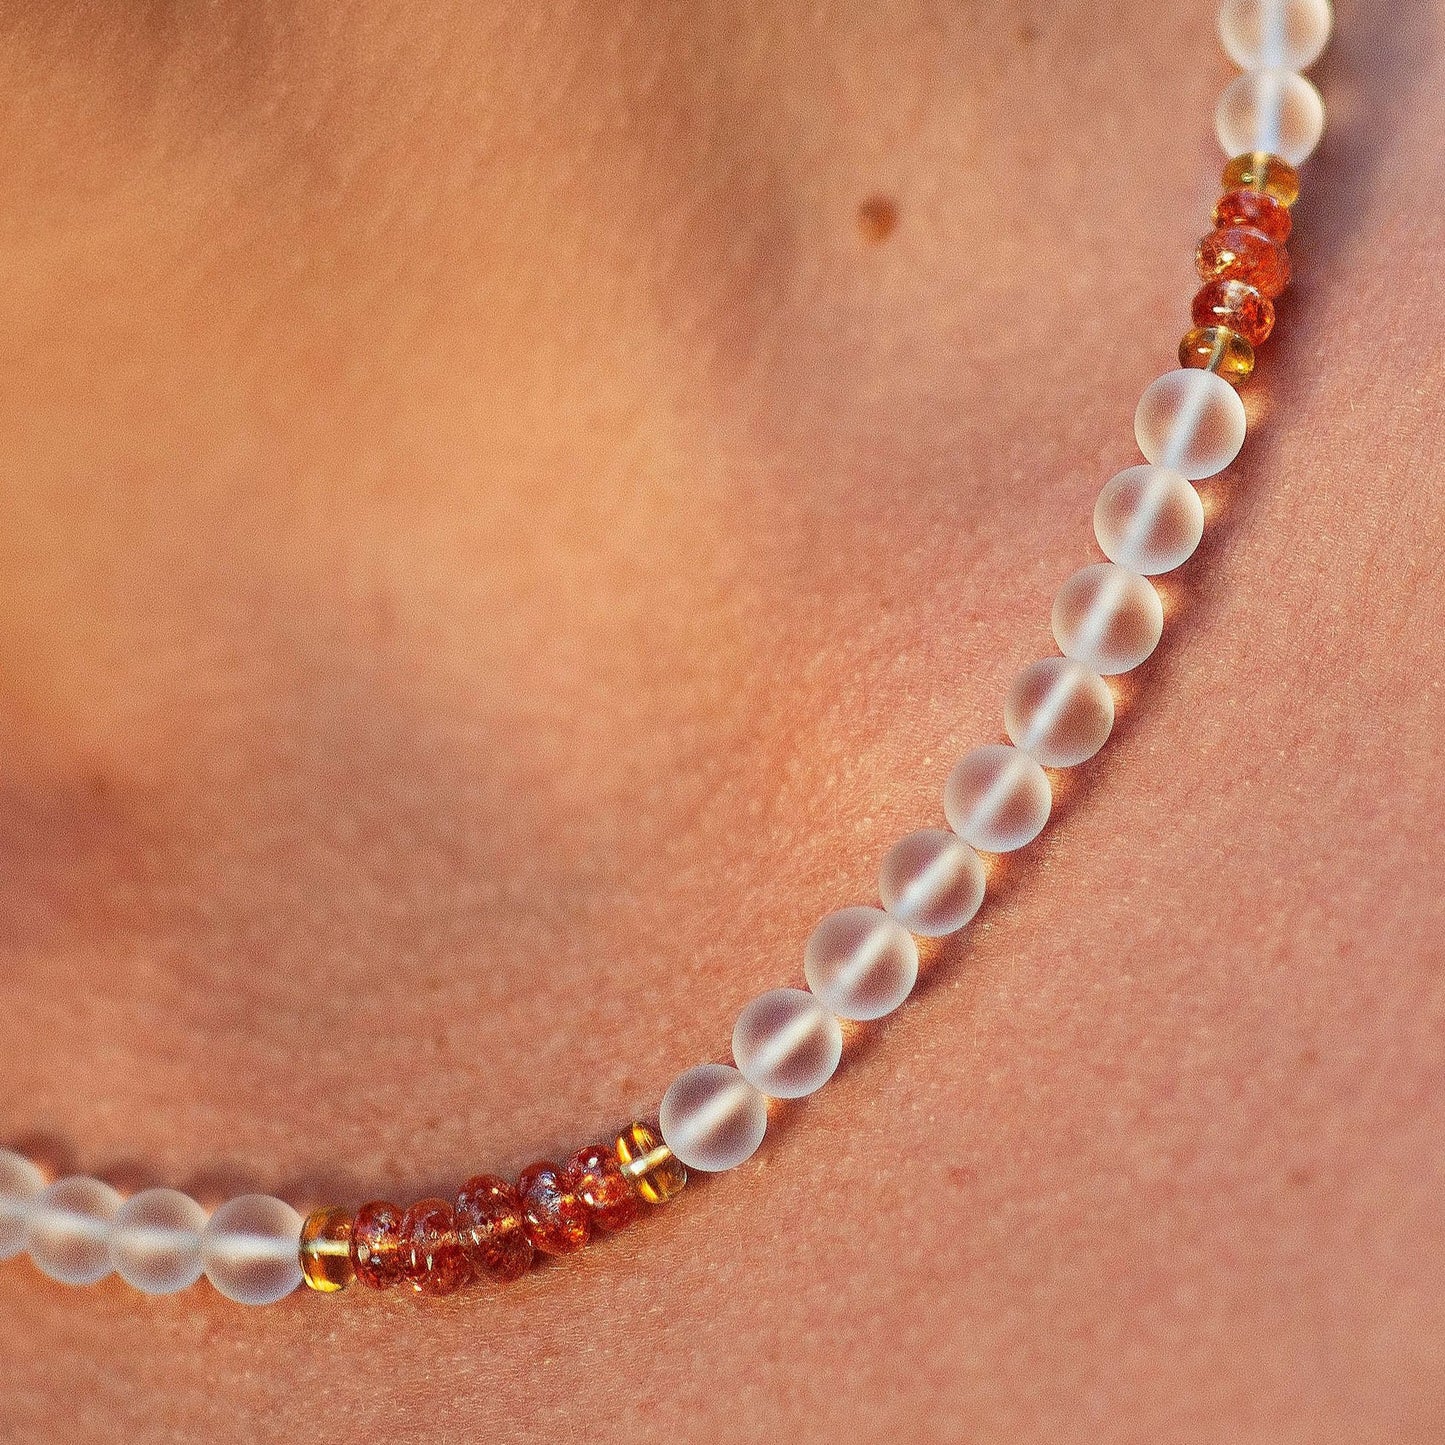 Crystal healing Golden Sun Necklace known for experiencing Sunstone healing benefits